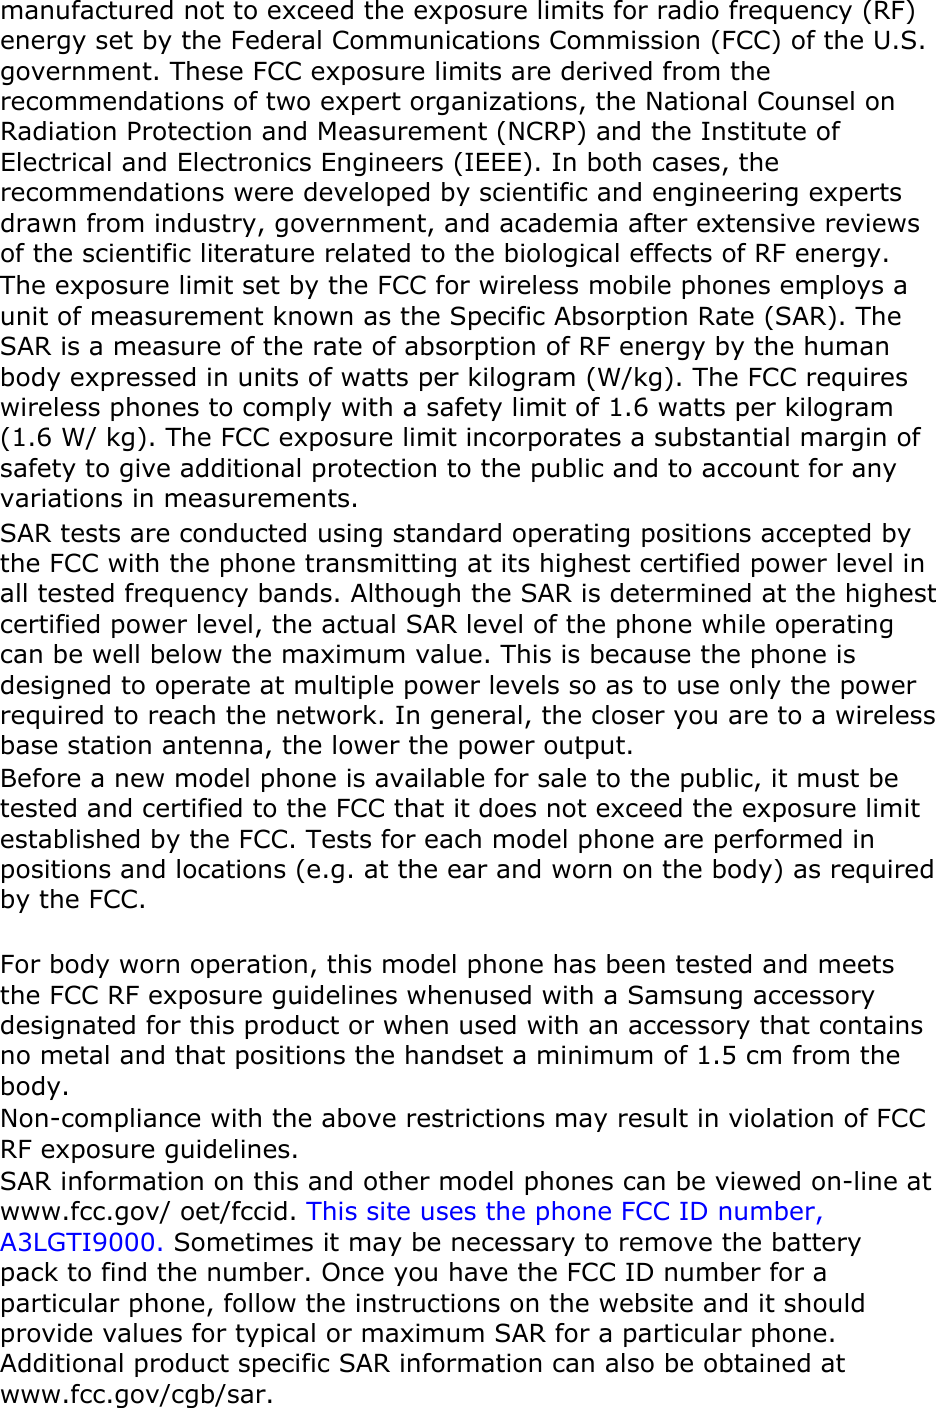 manufactured not to exceed the exposure limits for radio frequency (RF) energy set by the Federal Communications Commission (FCC) of the U.S. government. These FCC exposure limits are derived from the recommendations of two expert organizations, the National Counsel on Radiation Protection and Measurement (NCRP) and the Institute of Electrical and Electronics Engineers (IEEE). In both cases, the recommendations were developed by scientific and engineering experts drawn from industry, government, and academia after extensive reviews of the scientific literature related to the biological effects of RF energy. The exposure limit set by the FCC for wireless mobile phones employs a unit of measurement known as the Specific Absorption Rate (SAR). The SAR is a measure of the rate of absorption of RF energy by the human body expressed in units of watts per kilogram (W/kg). The FCC requires wireless phones to comply with a safety limit of 1.6 watts per kilogram (1.6 W/ kg). The FCC exposure limit incorporates a substantial margin of safety to give additional protection to the public and to account for any variations in measurements. SAR tests are conducted using standard operating positions accepted by the FCC with the phone transmitting at its highest certified power level in all tested frequency bands. Although the SAR is determined at the highest certified power level, the actual SAR level of the phone while operating can be well below the maximum value. This is because the phone is designed to operate at multiple power levels so as to use only the power required to reach the network. In general, the closer you are to a wireless base station antenna, the lower the power output. Before a new model phone is available for sale to the public, it must be tested and certified to the FCC that it does not exceed the exposure limit established by the FCC. Tests for each model phone are performed in positions and locations (e.g. at the ear and worn on the body) as required by the FCC.      For body worn operation, this model phone has been tested and meets the FCC RF exposure guidelines whenused with a Samsung accessory designated for this product or when used with an accessory that contains no metal and that positions the handset a minimum of 1.5 cm from the body.  Non-compliance with the above restrictions may result in violation of FCC RF exposure guidelines. SAR information on this and other model phones can be viewed on-line at www.fcc.gov/ oet/fccid. This site uses the phone FCC ID number, A3LGTI9000. Sometimes it may be necessary to remove the battery pack to find the number. Once you have the FCC ID number for a particular phone, follow the instructions on the website and it should provide values for typical or maximum SAR for a particular phone. Additional product specific SAR information can also be obtained at www.fcc.gov/cgb/sar. 